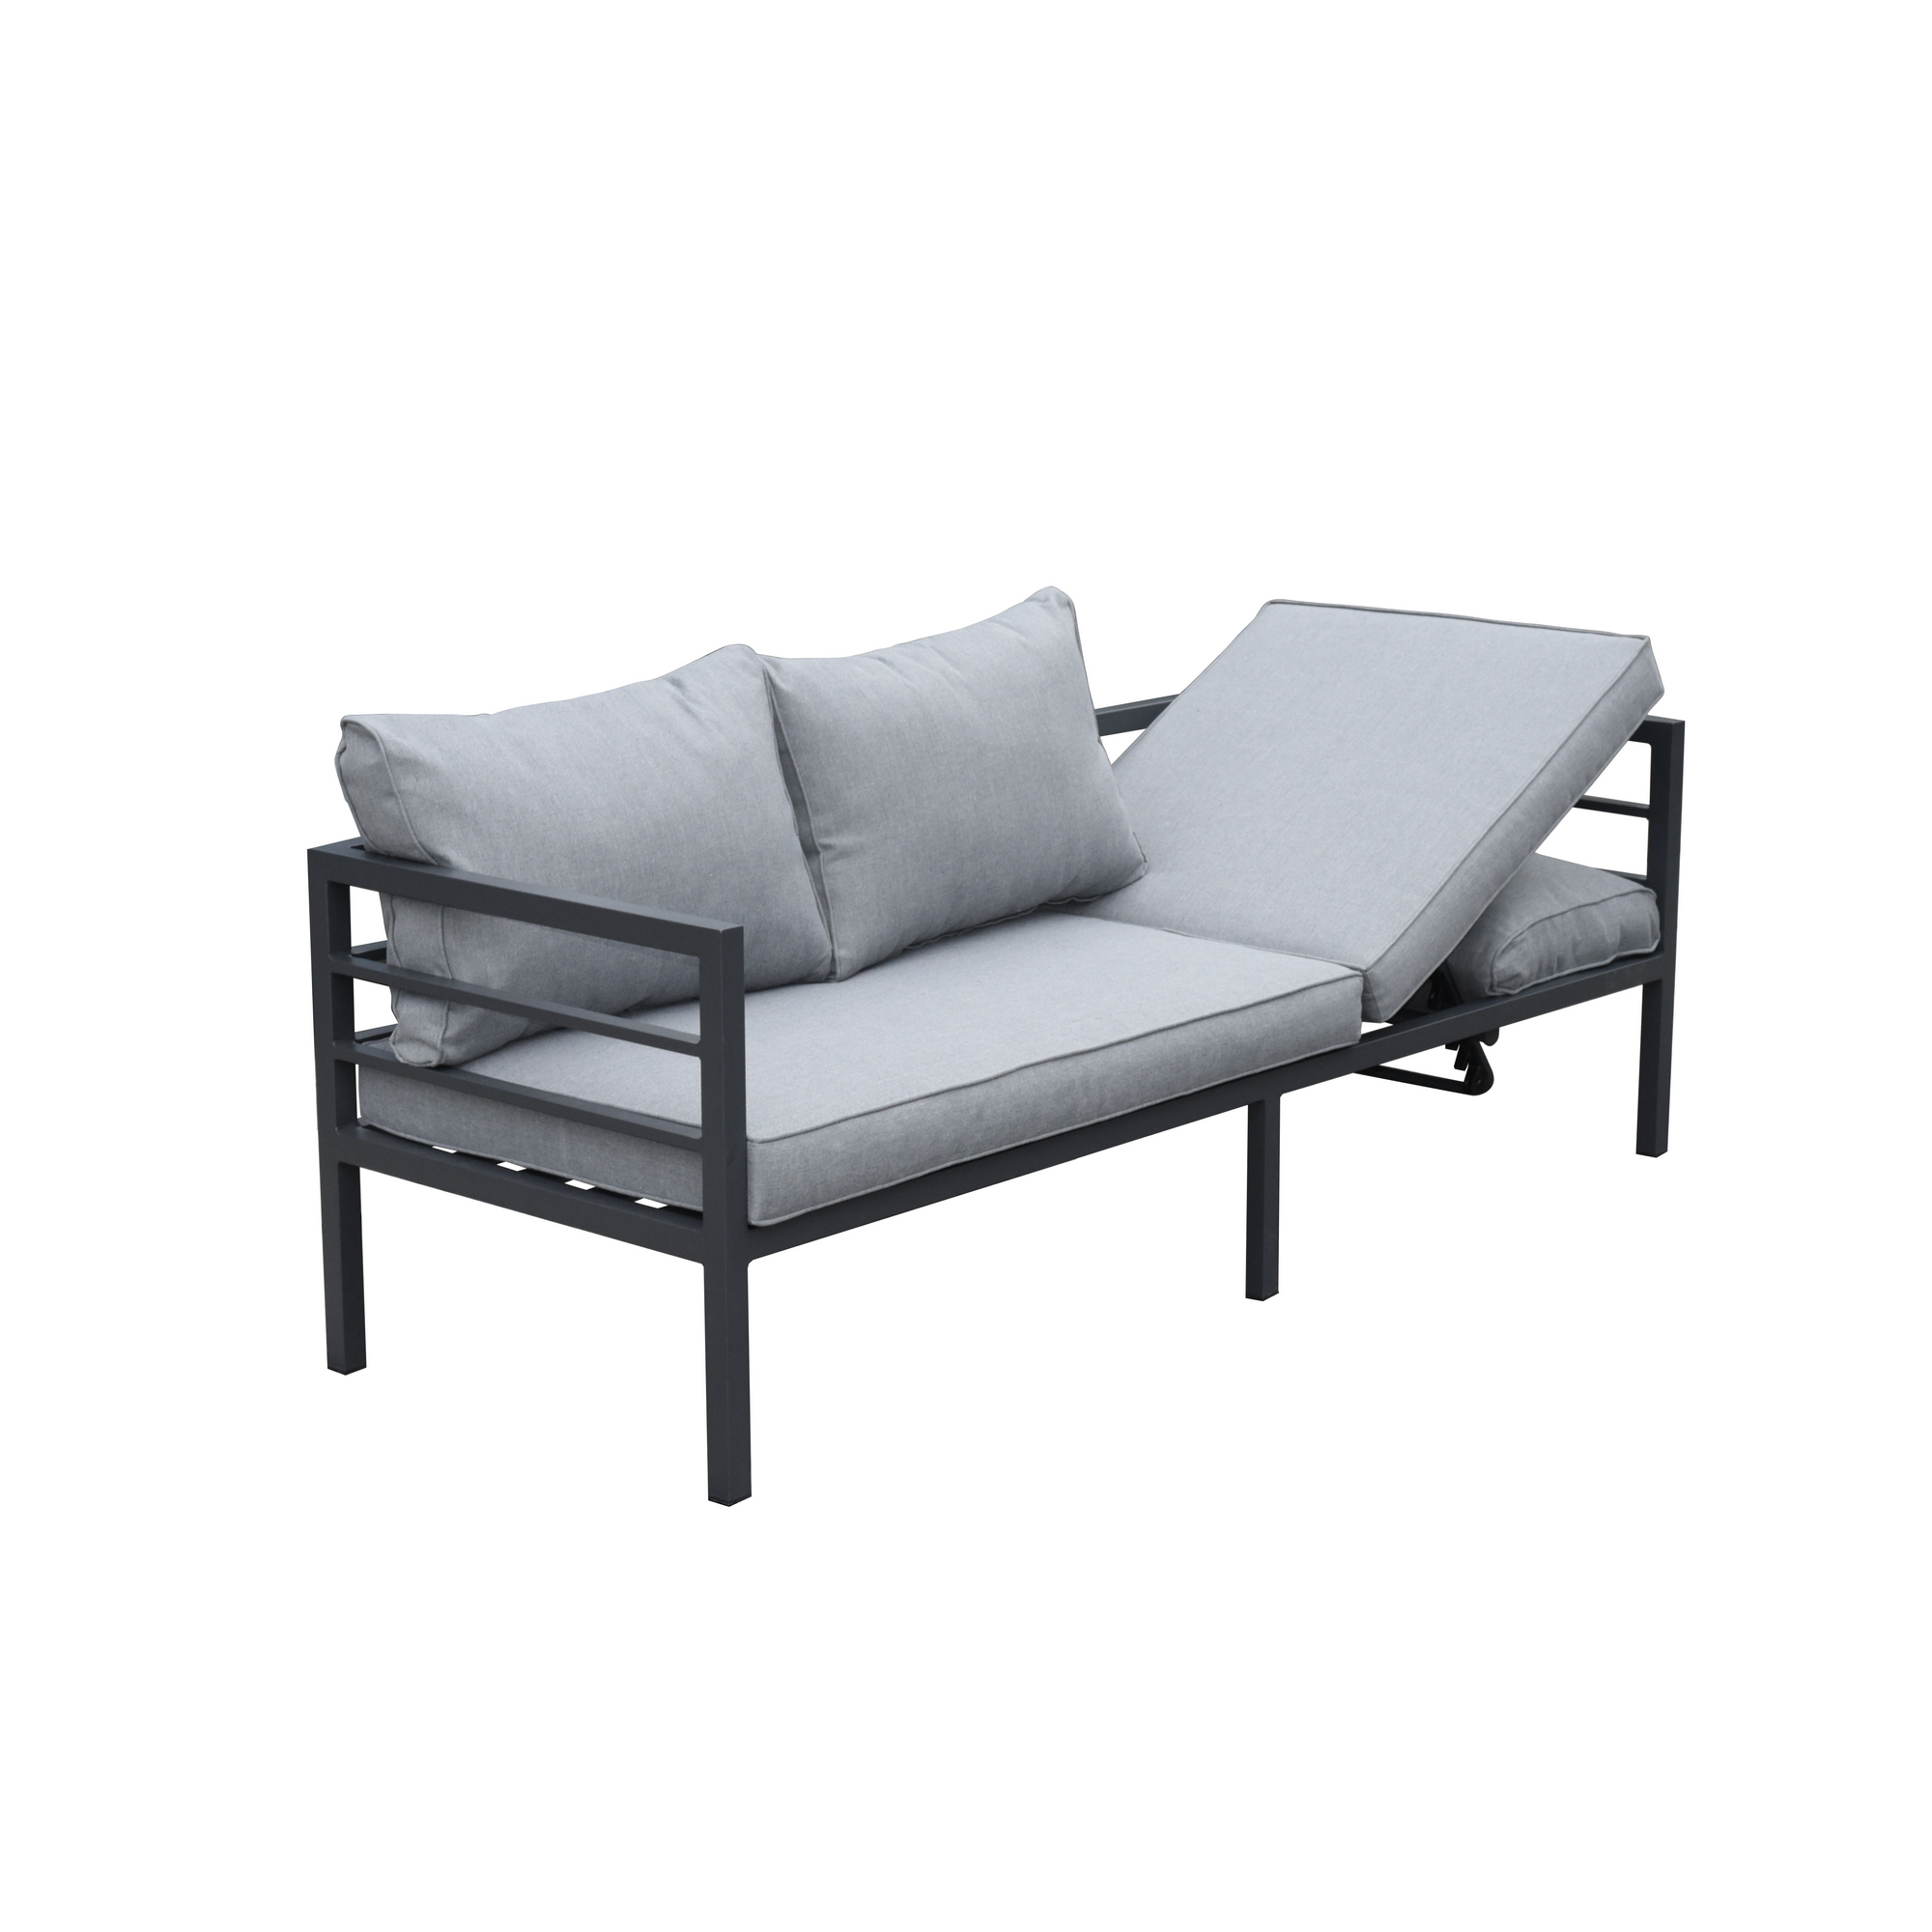 Ecklounge 'Maia' anthrazit/grau 4-teilig + product picture